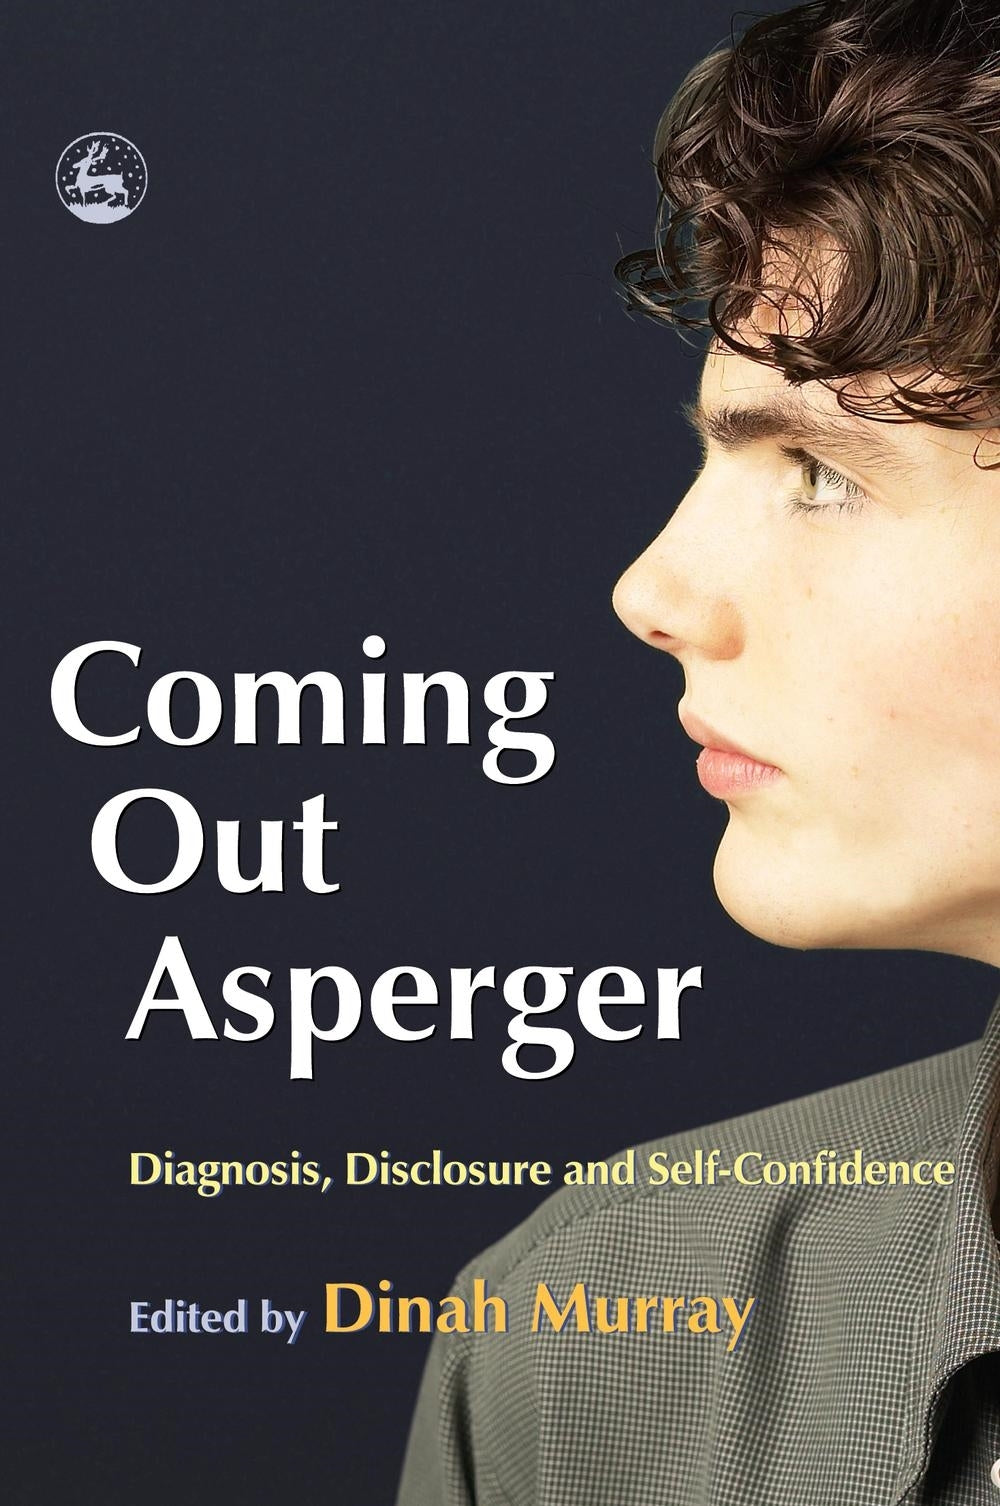 Coming Out Asperger by Dinah Murray, No Author Listed